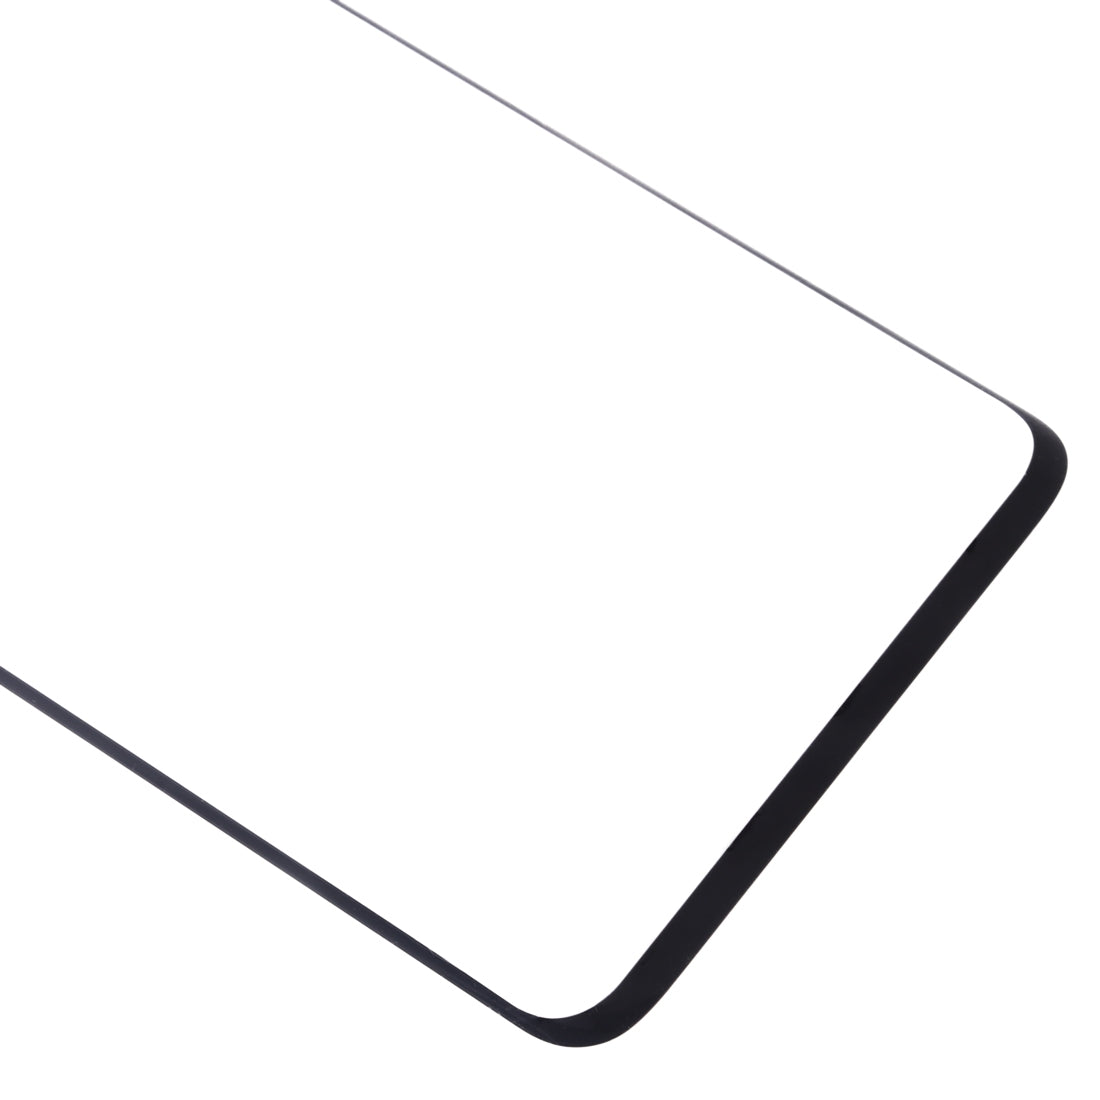 Outer Glass Front Screen Samsung Galaxy S10 Black